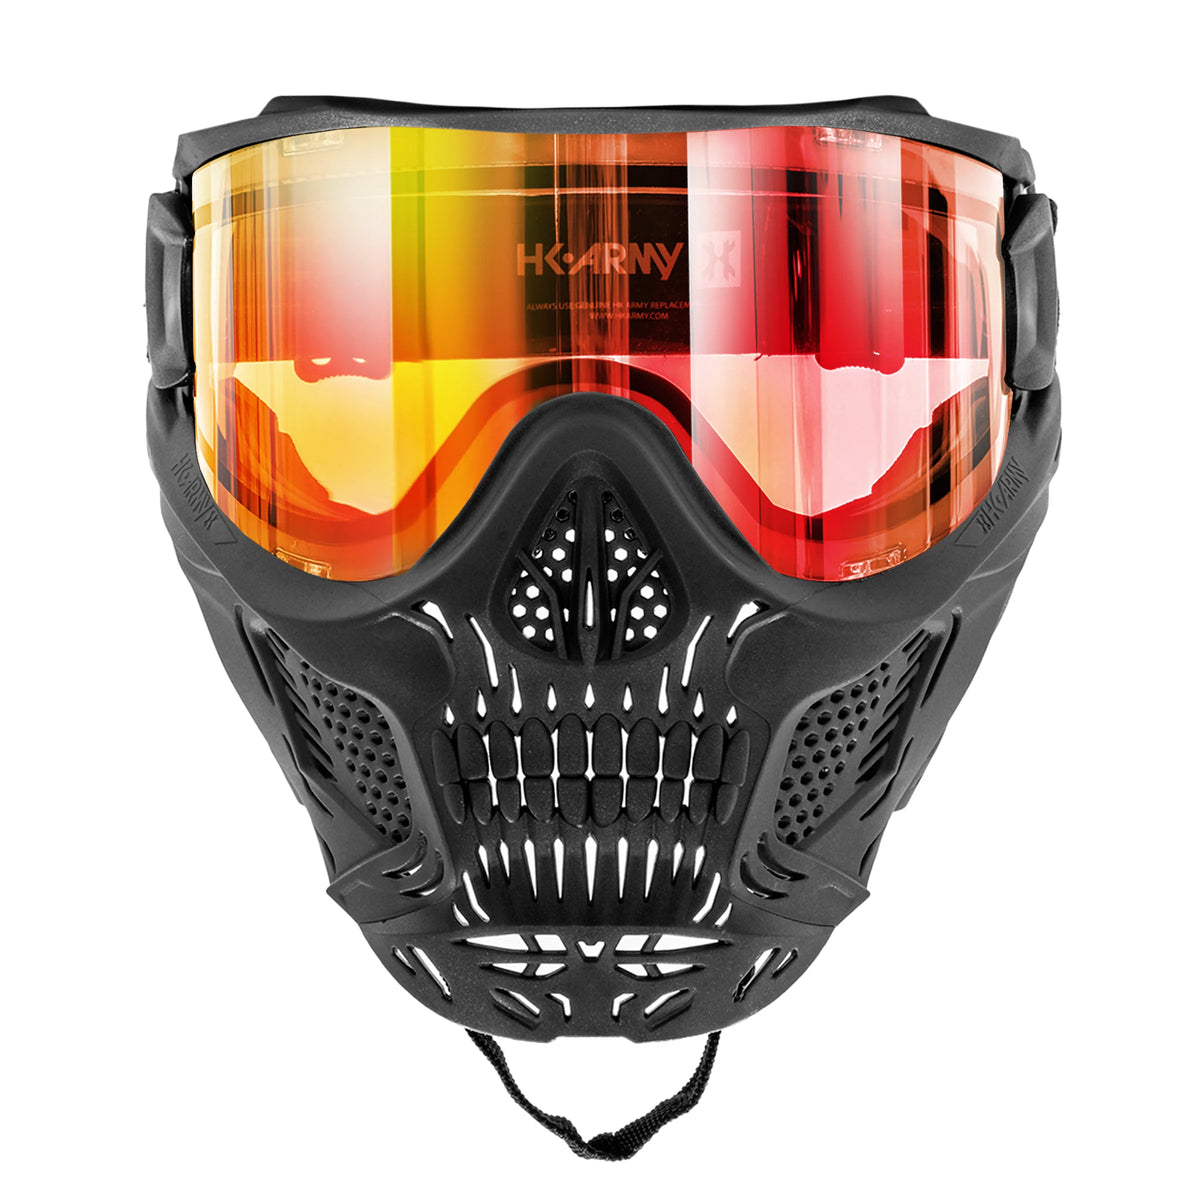 Hstl Skull Goggle "Death" - Black W/ Fire Lens | Paintball Goggle | Mask | Hk Army